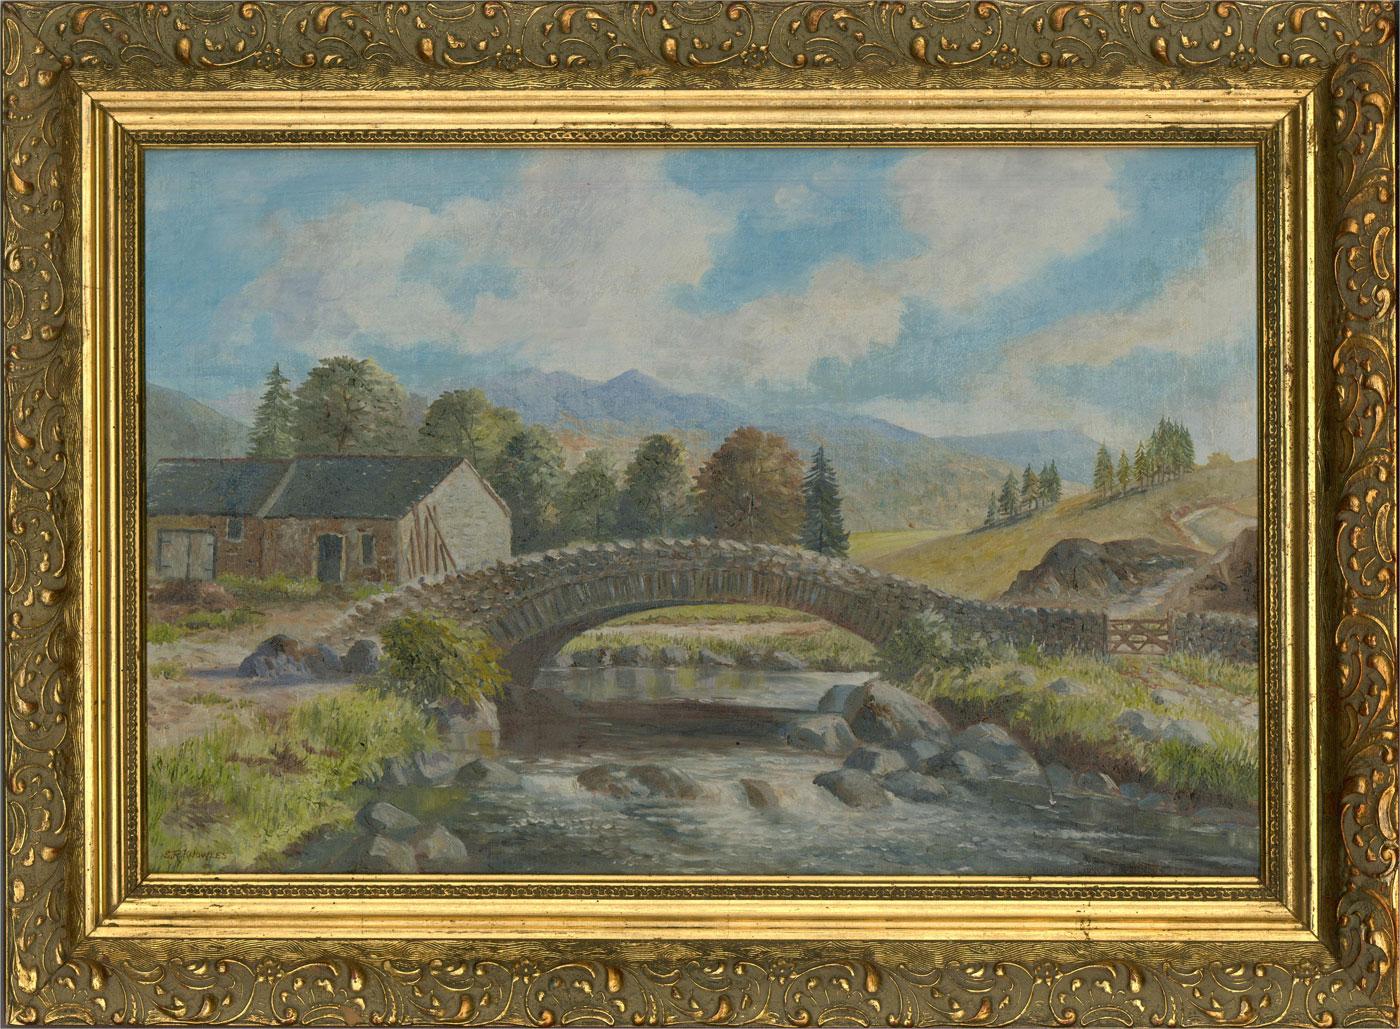 A rural view of an old packhorse bridge in Cumbria. Presented in an ornate gilt-effect wooden frame. Signed to the lower-left edge. There is a label on the verso inscribed, 'Old packhorse bridge at Watendlath, nr. Keswick, Cumbria'. On canvas board.
